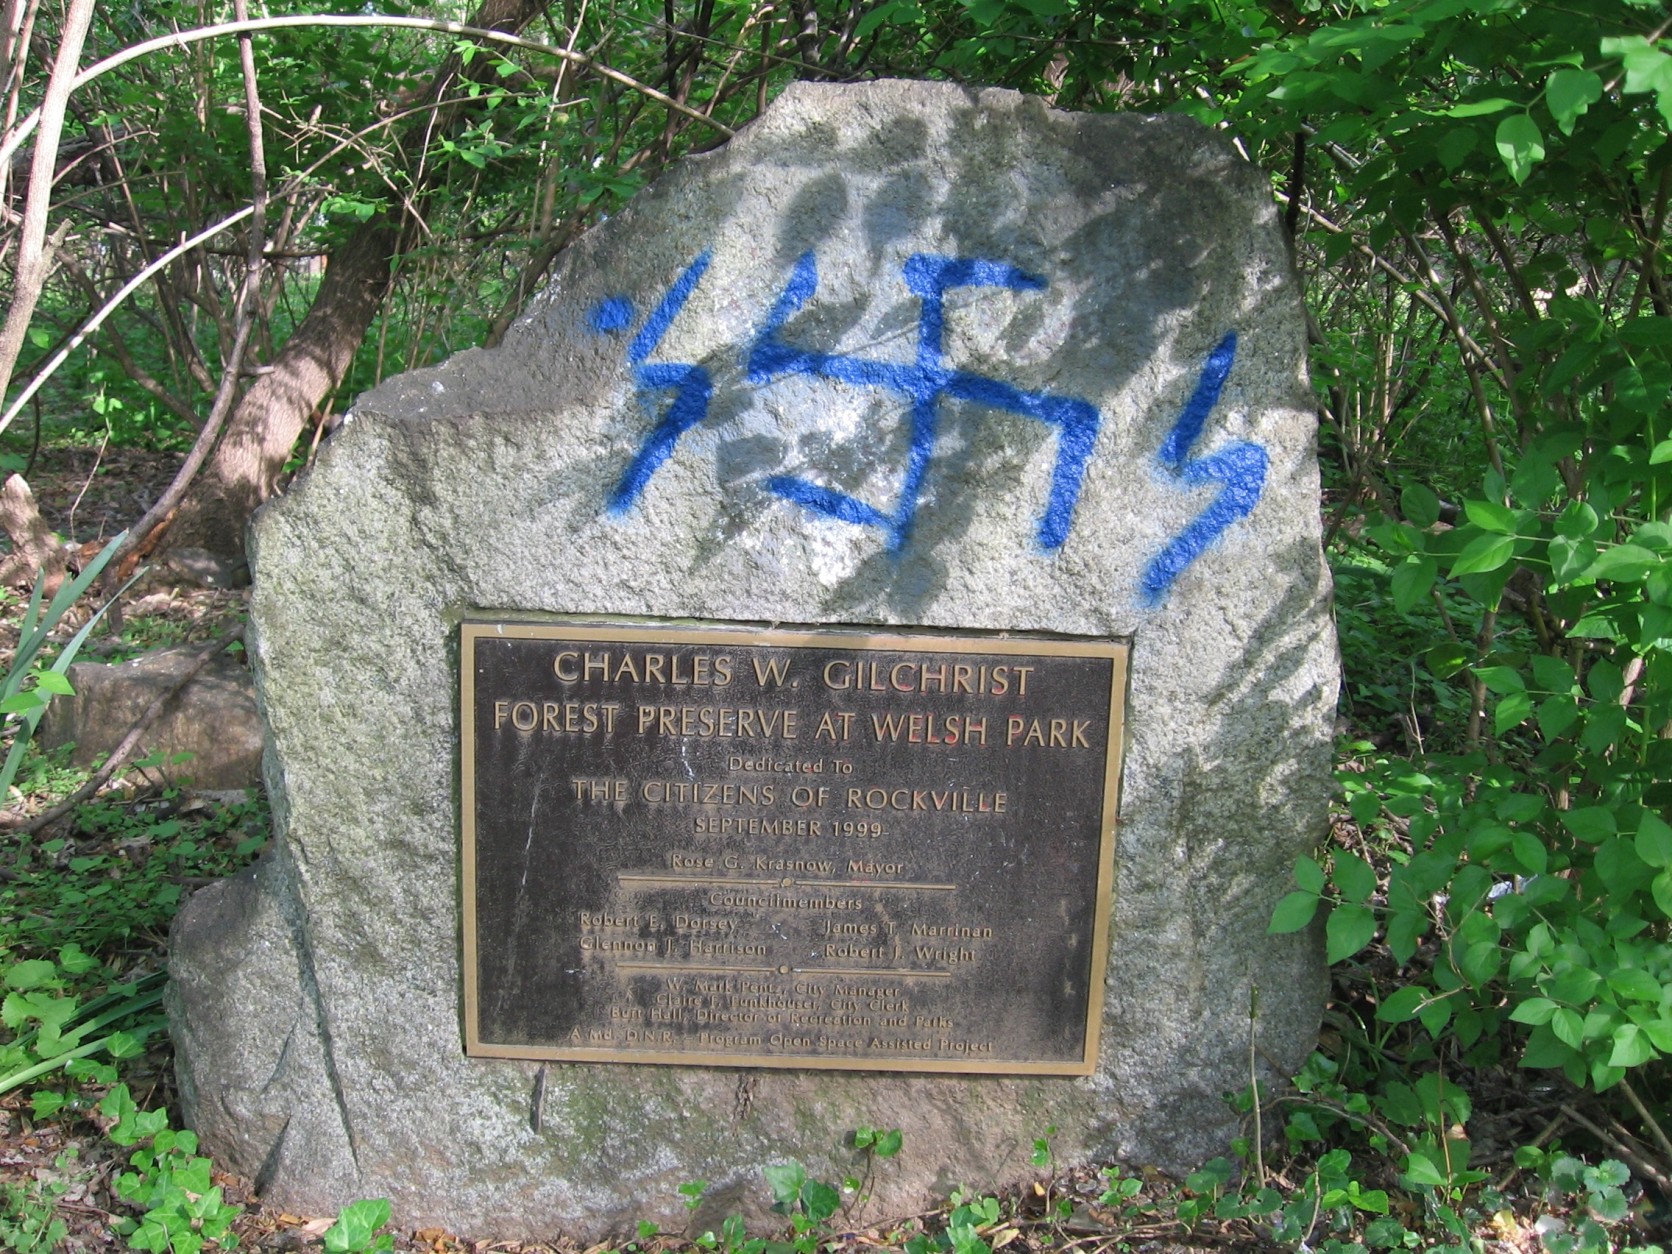 At Welsh Park on Mannakee Street, this monument and plaque commemorates “Charles W. Gilchrist – Forest Preserve at Welsh Park – Dedicated to the Citizens of Rockville.” (Courtesy Montgomery County Police)